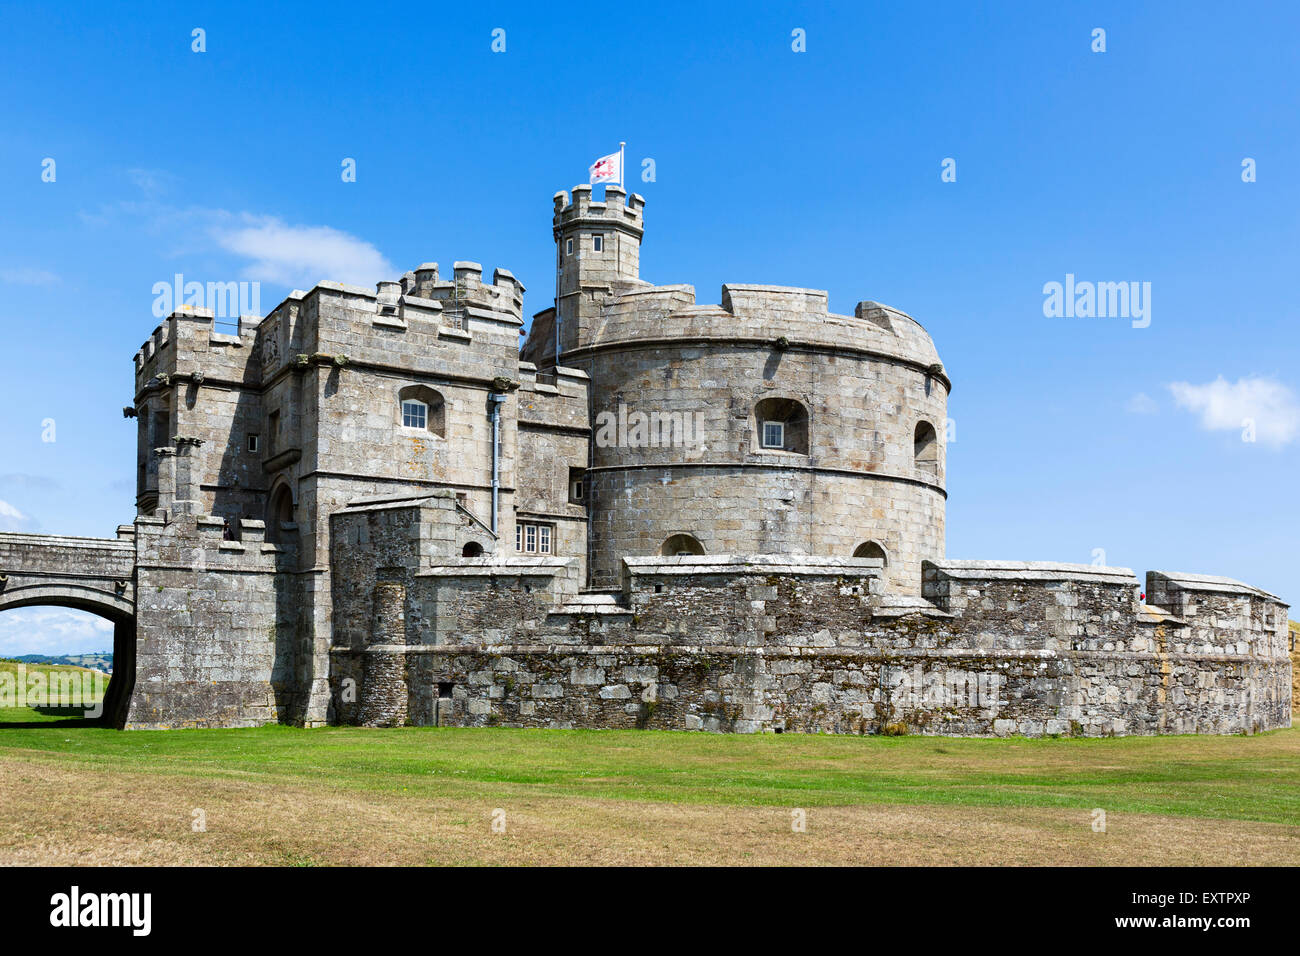 The Keep at Pendennis Castle, Falmouth, Cornwall, England, UK Stock Photo